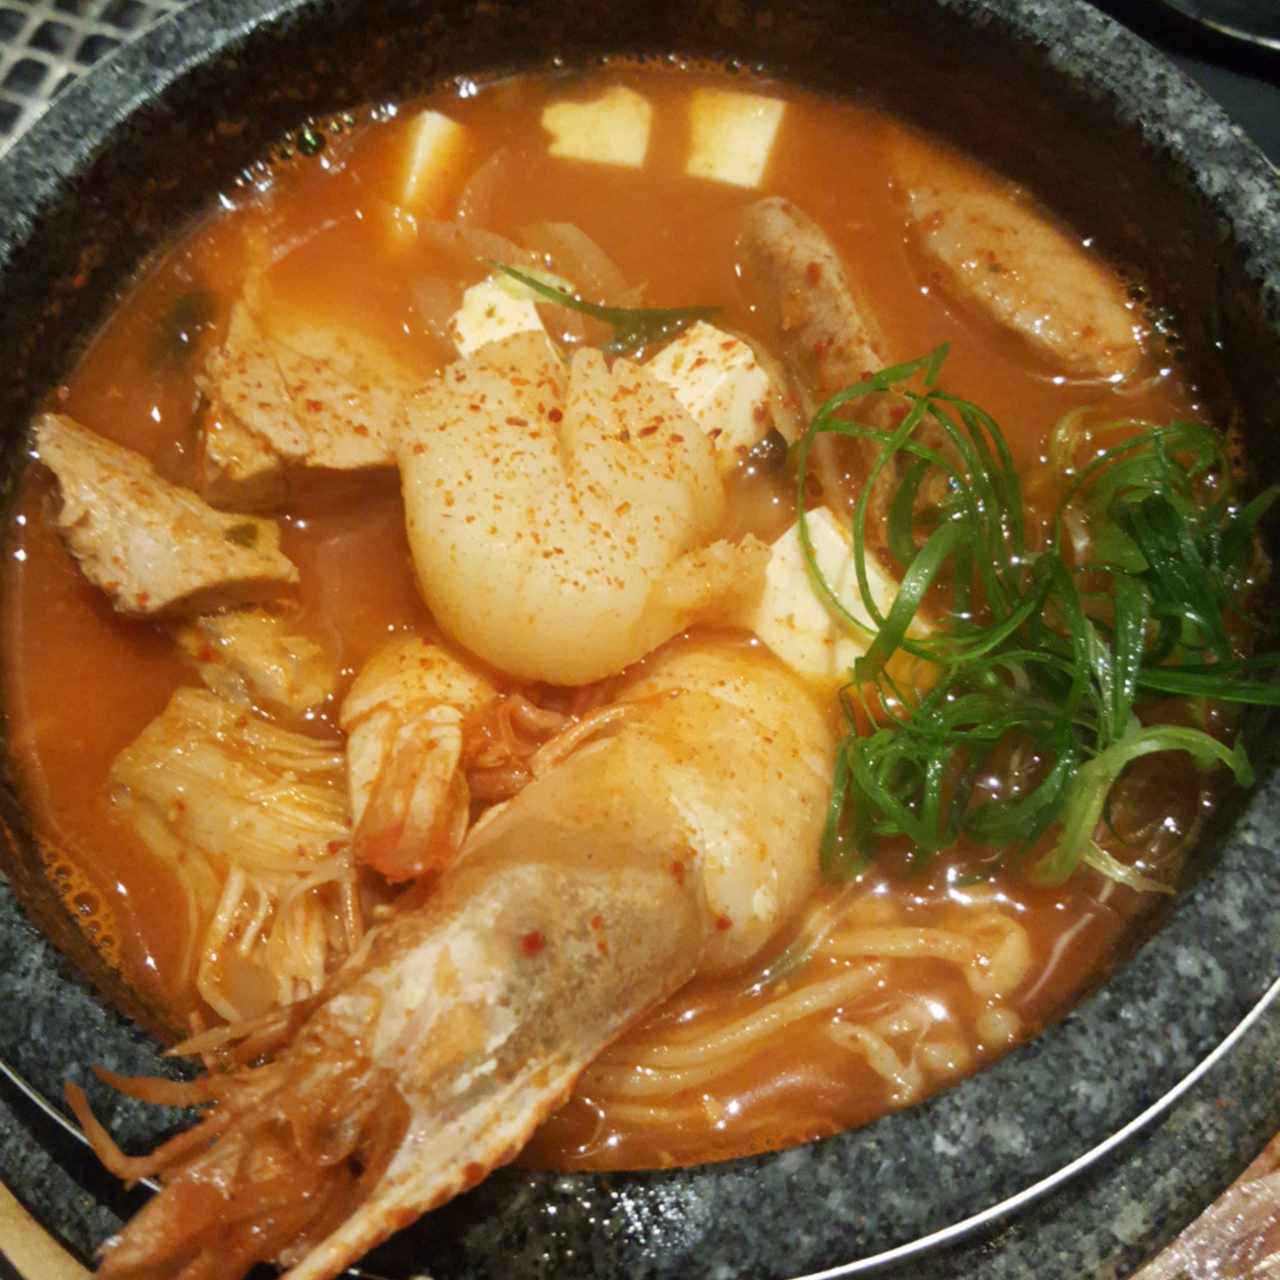 Soups - KIMCHEE SEAFOOD SOUP